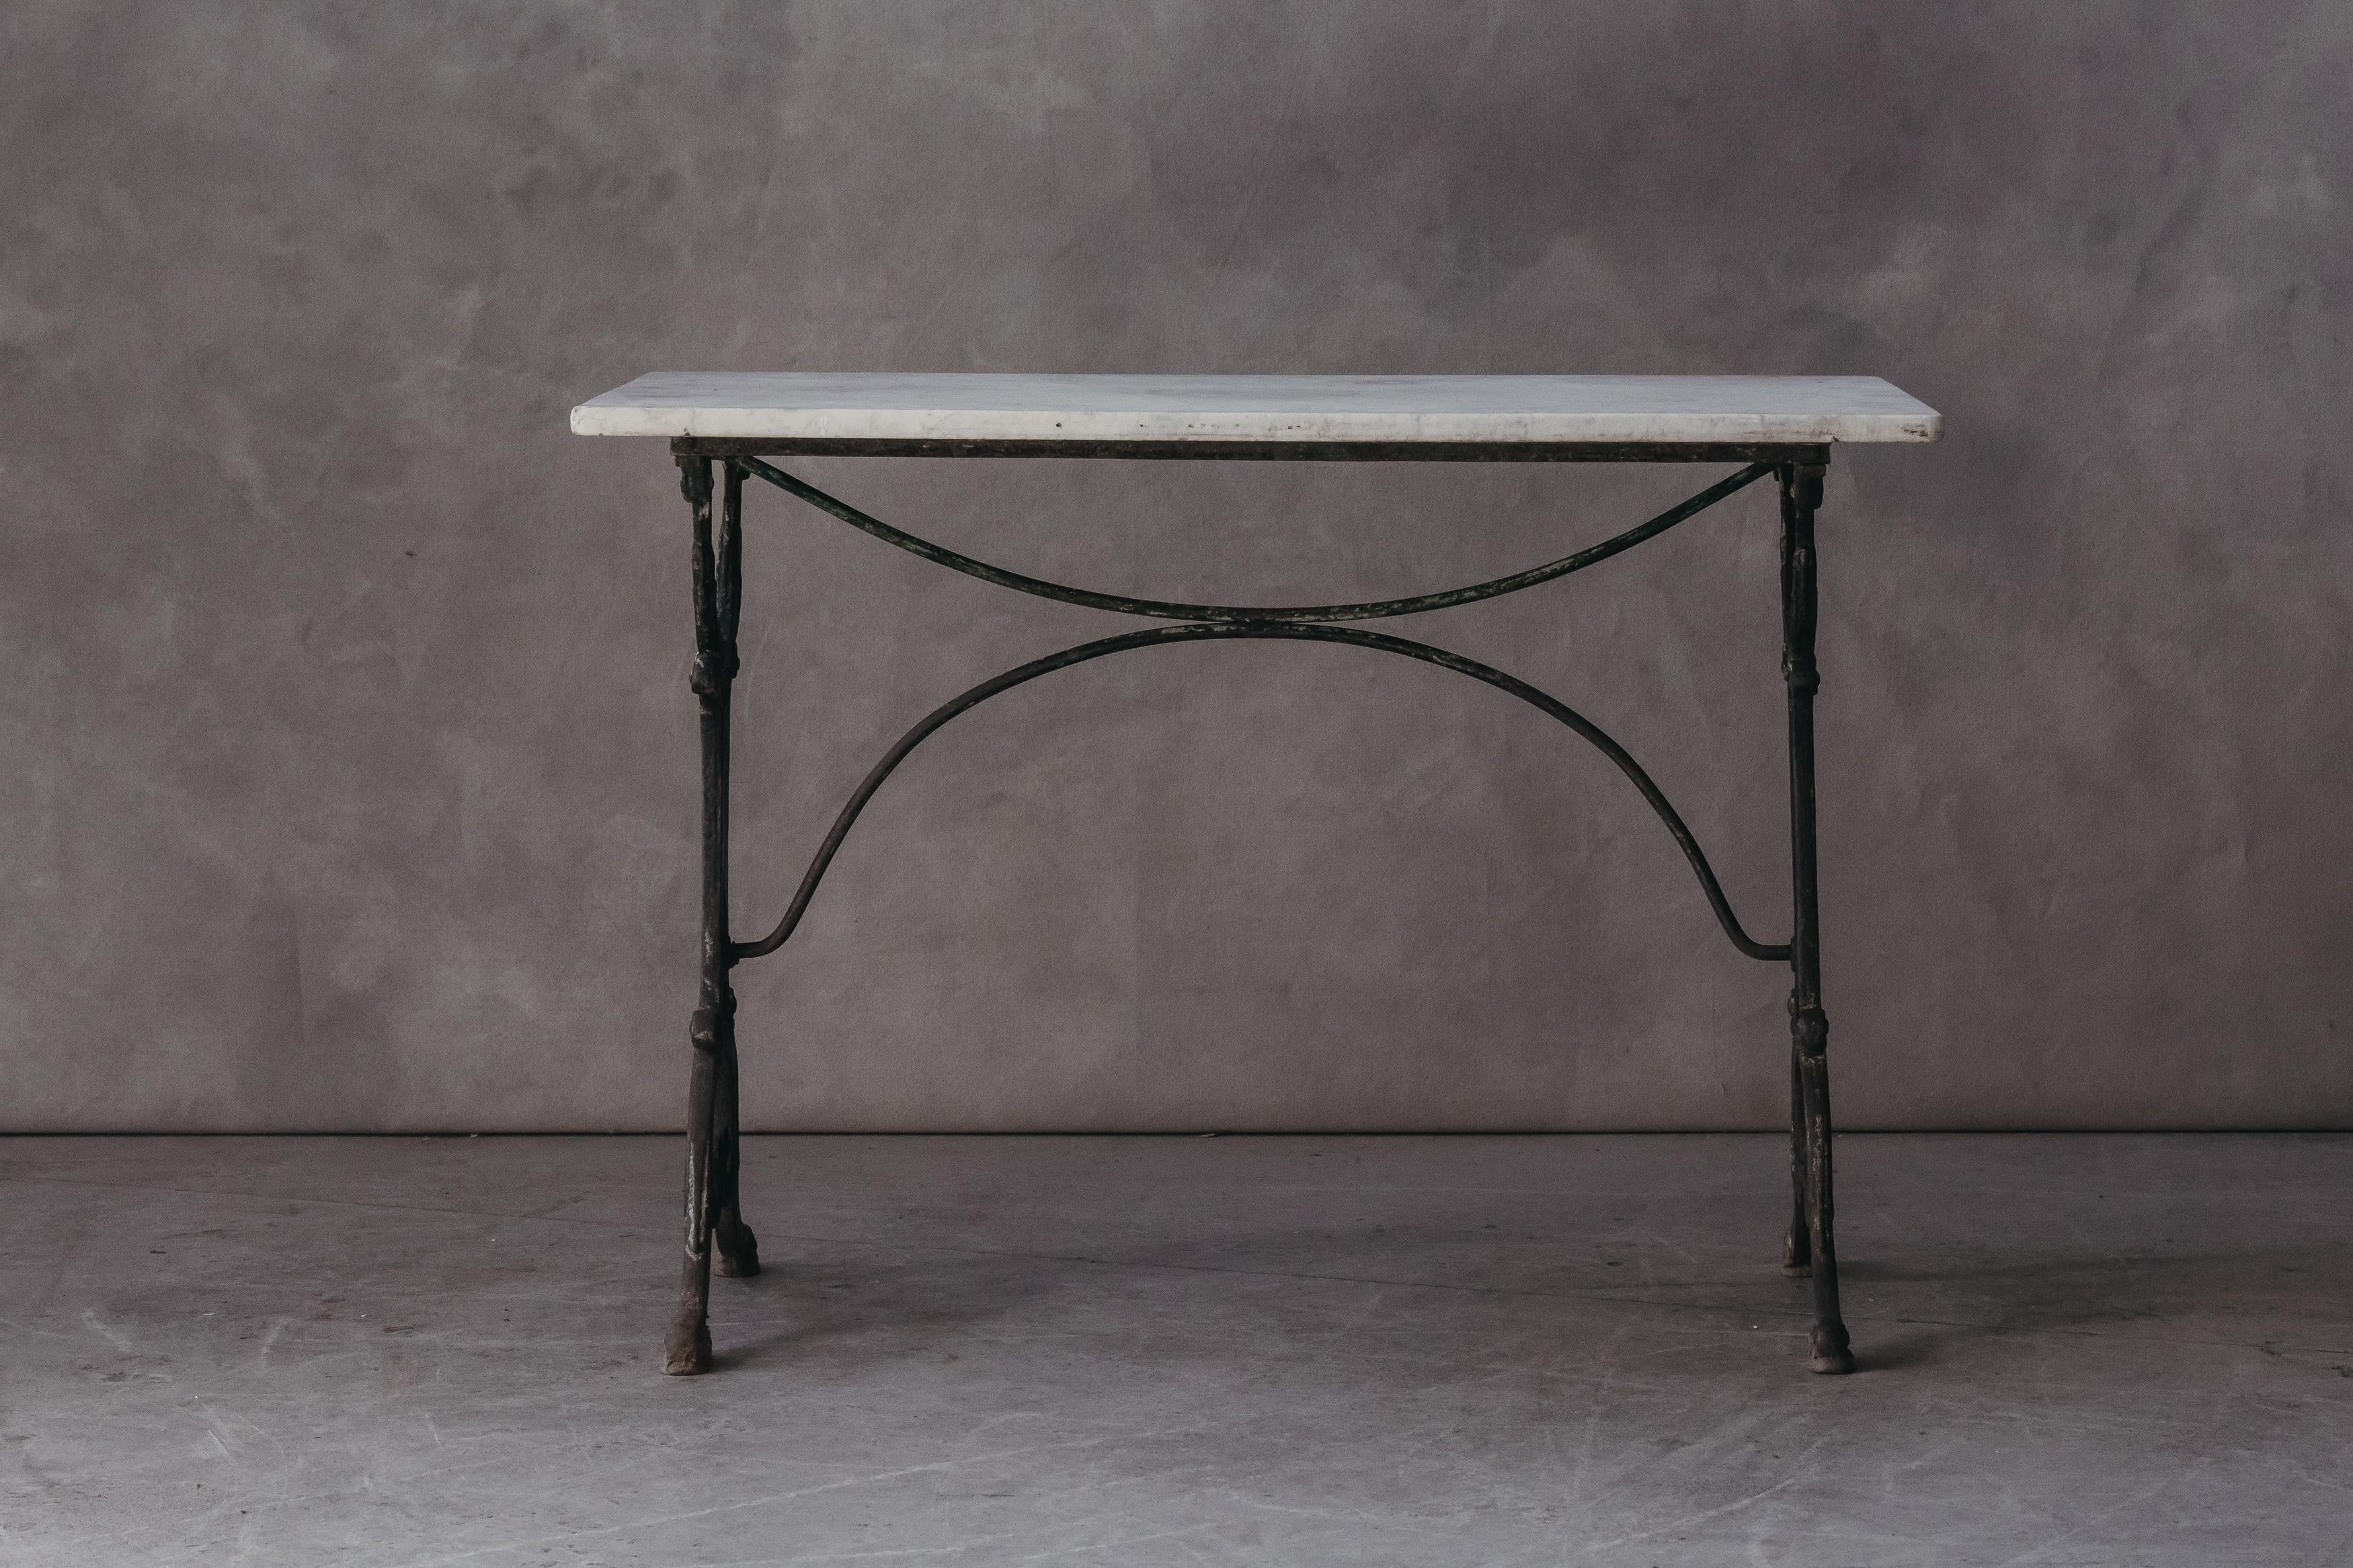 Vintage Marble Bistro Table From France, circa 1950. Original white marble top on anion base. Nice original patina.

We prefer to speak directly with our clients. So, If you have any questions or would like to know more please give us a call or